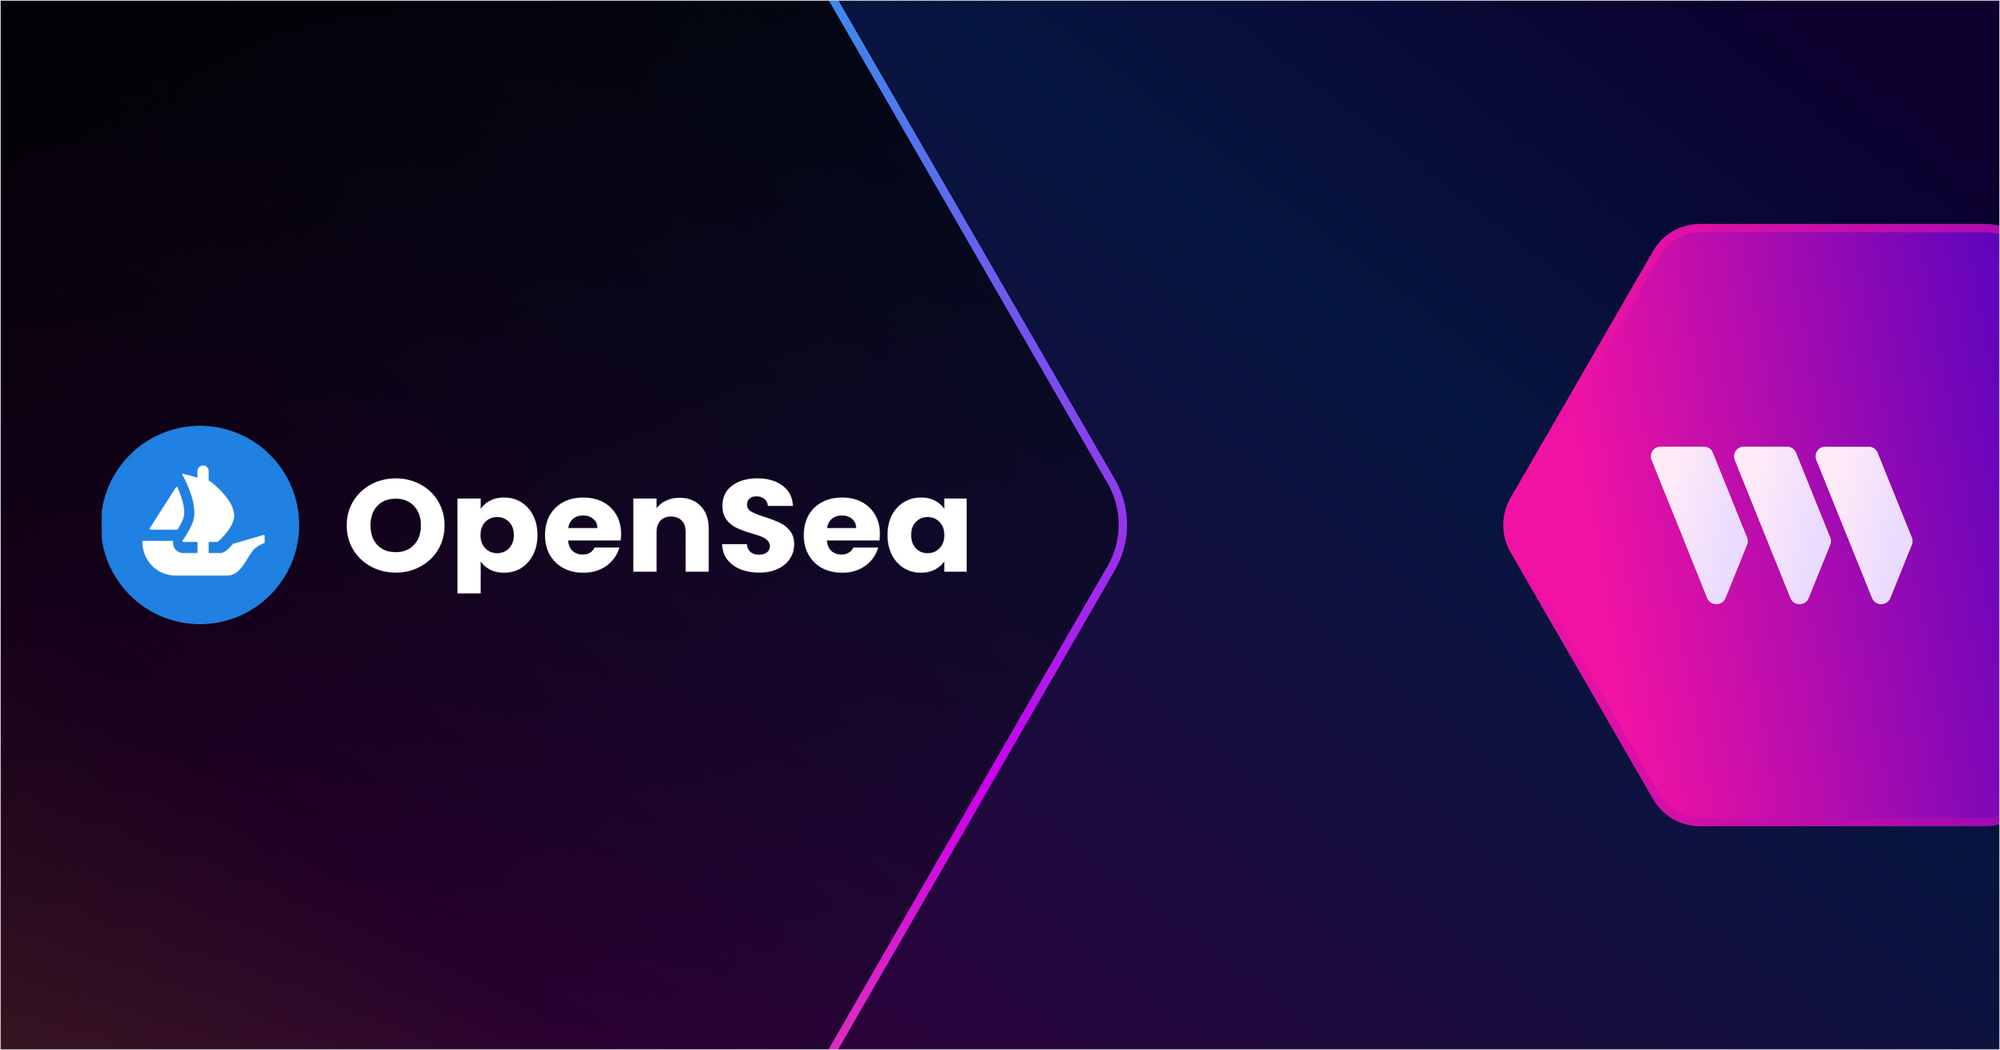 What is OpenSea and how to use it?